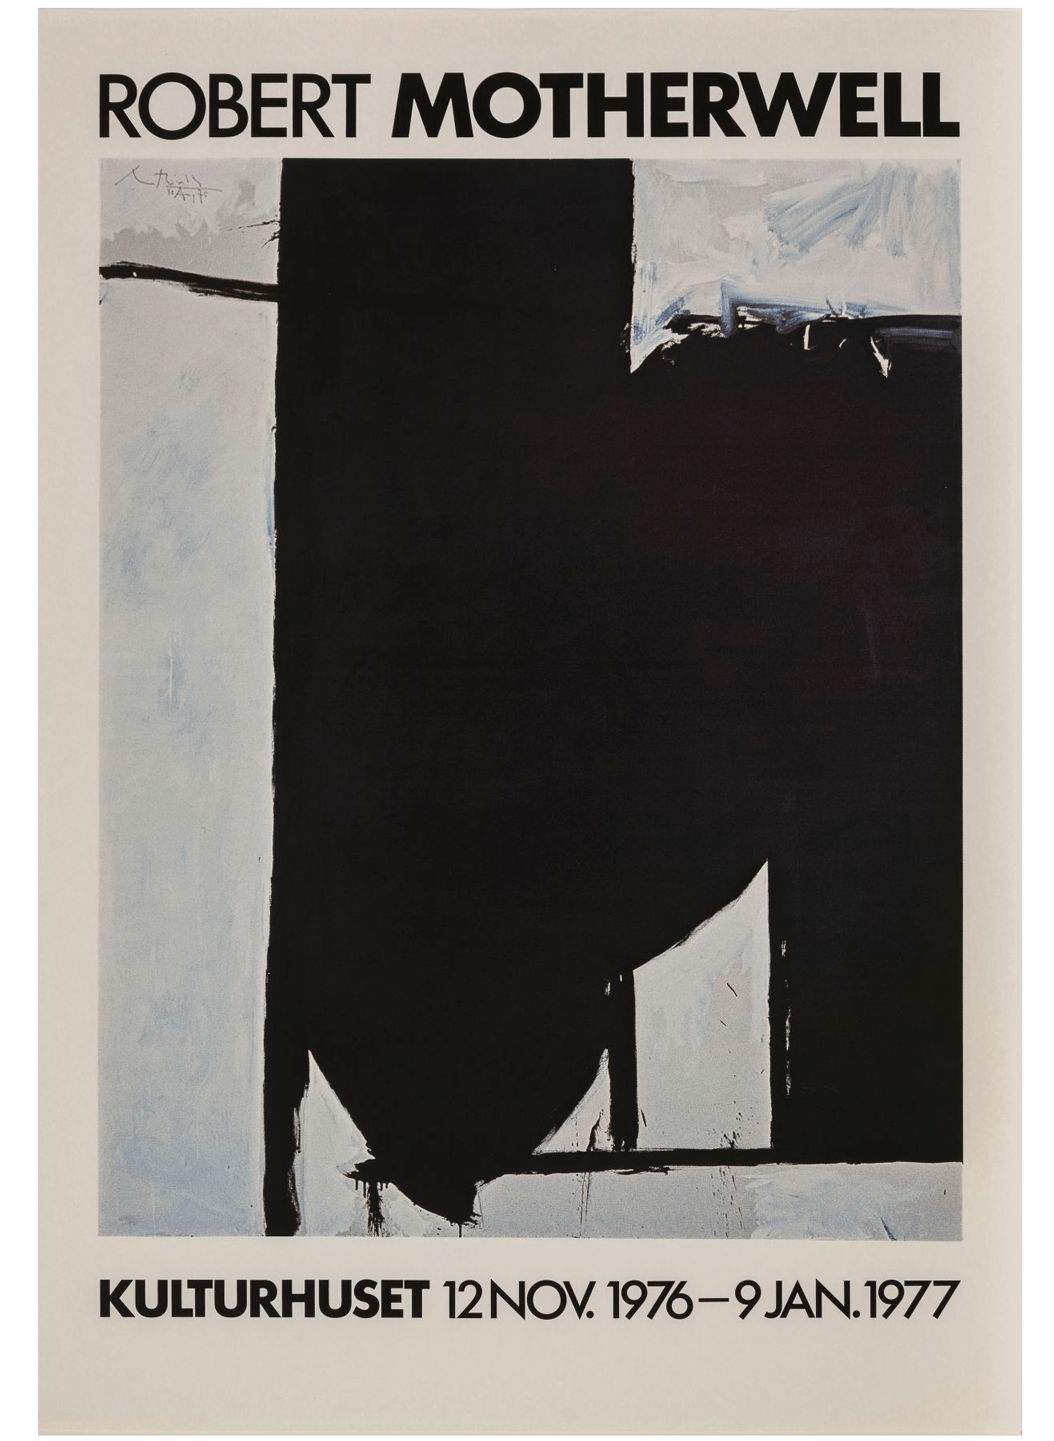 Exhibition poster for Robert Motherwell, 1977. Features bold black text and an image of a Motherwell painting on an off-white background.